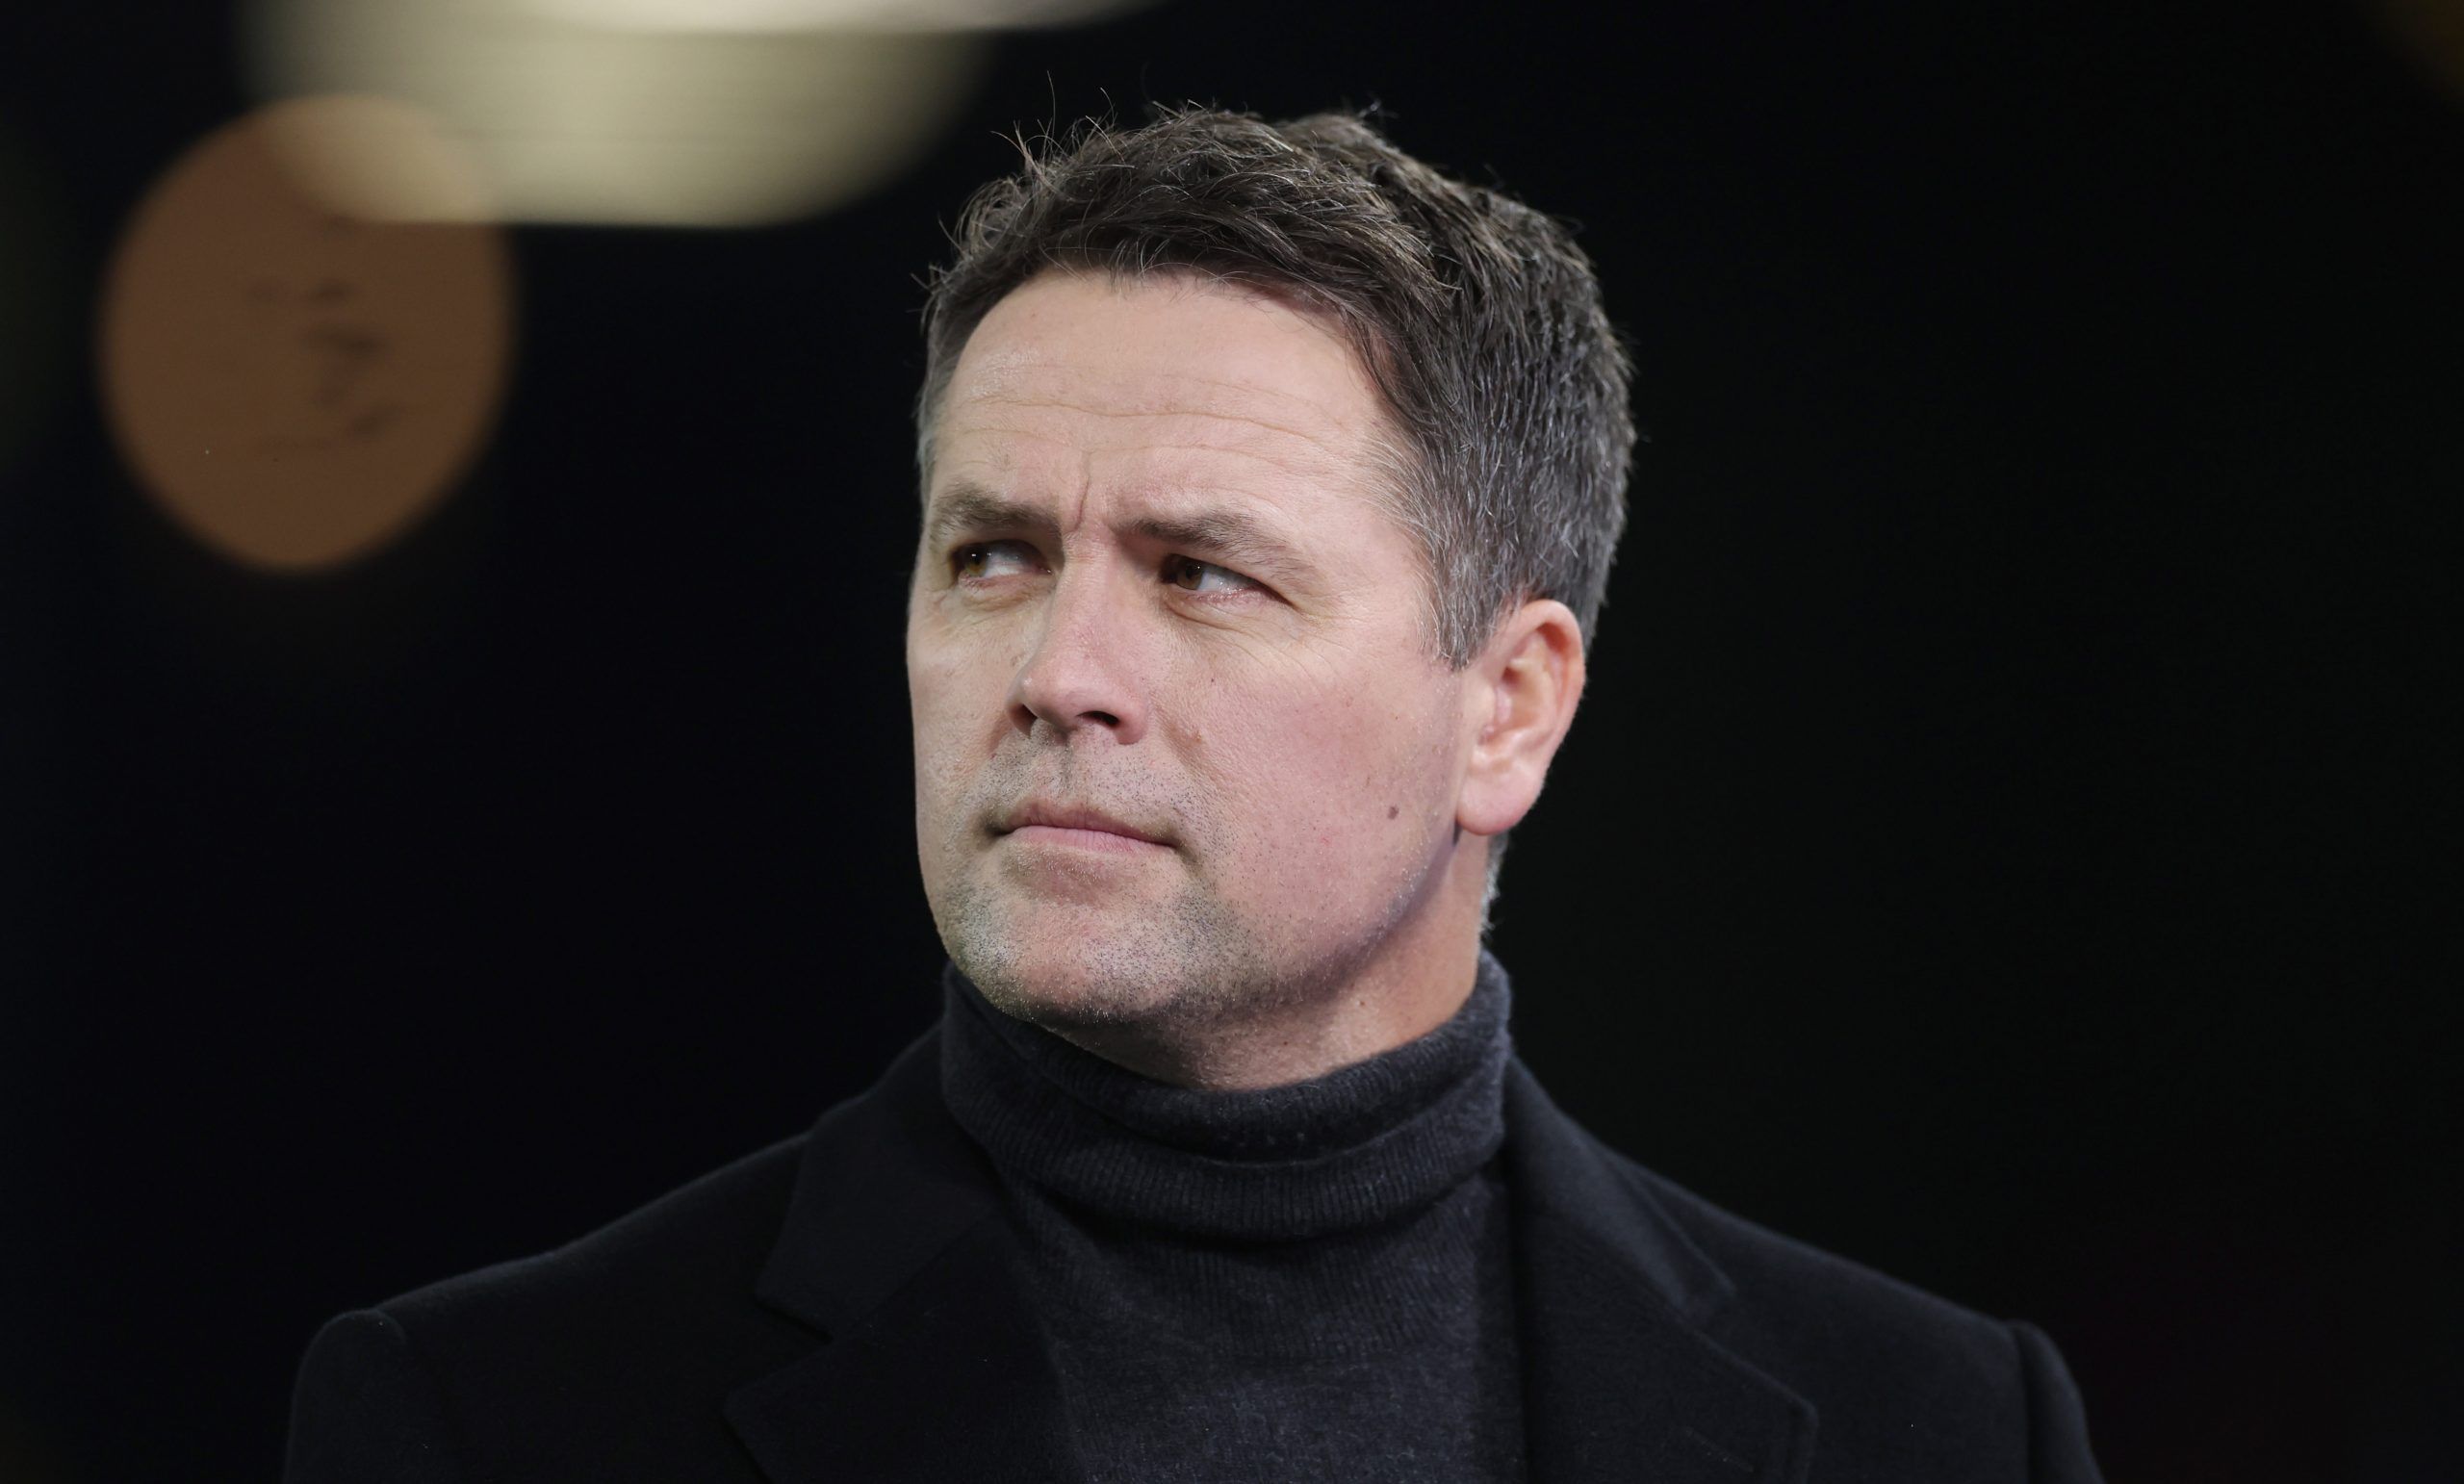 Soccer Football - Premier League - Leeds United v Aston Villa - Elland Road, Leeds, Britain - March 10, 2022 TV pundit Michael Owen before the match Action Images via Reuters/Lee Smith EDITORIAL USE ONLY. No use with unauthorized audio, video, data, fixture lists, club/league logos or 'live' services. Online in-match use limited to 75 images, no video emulation. No use in betting, games or single club /league/player publications.  Please contact your account representative for further details.